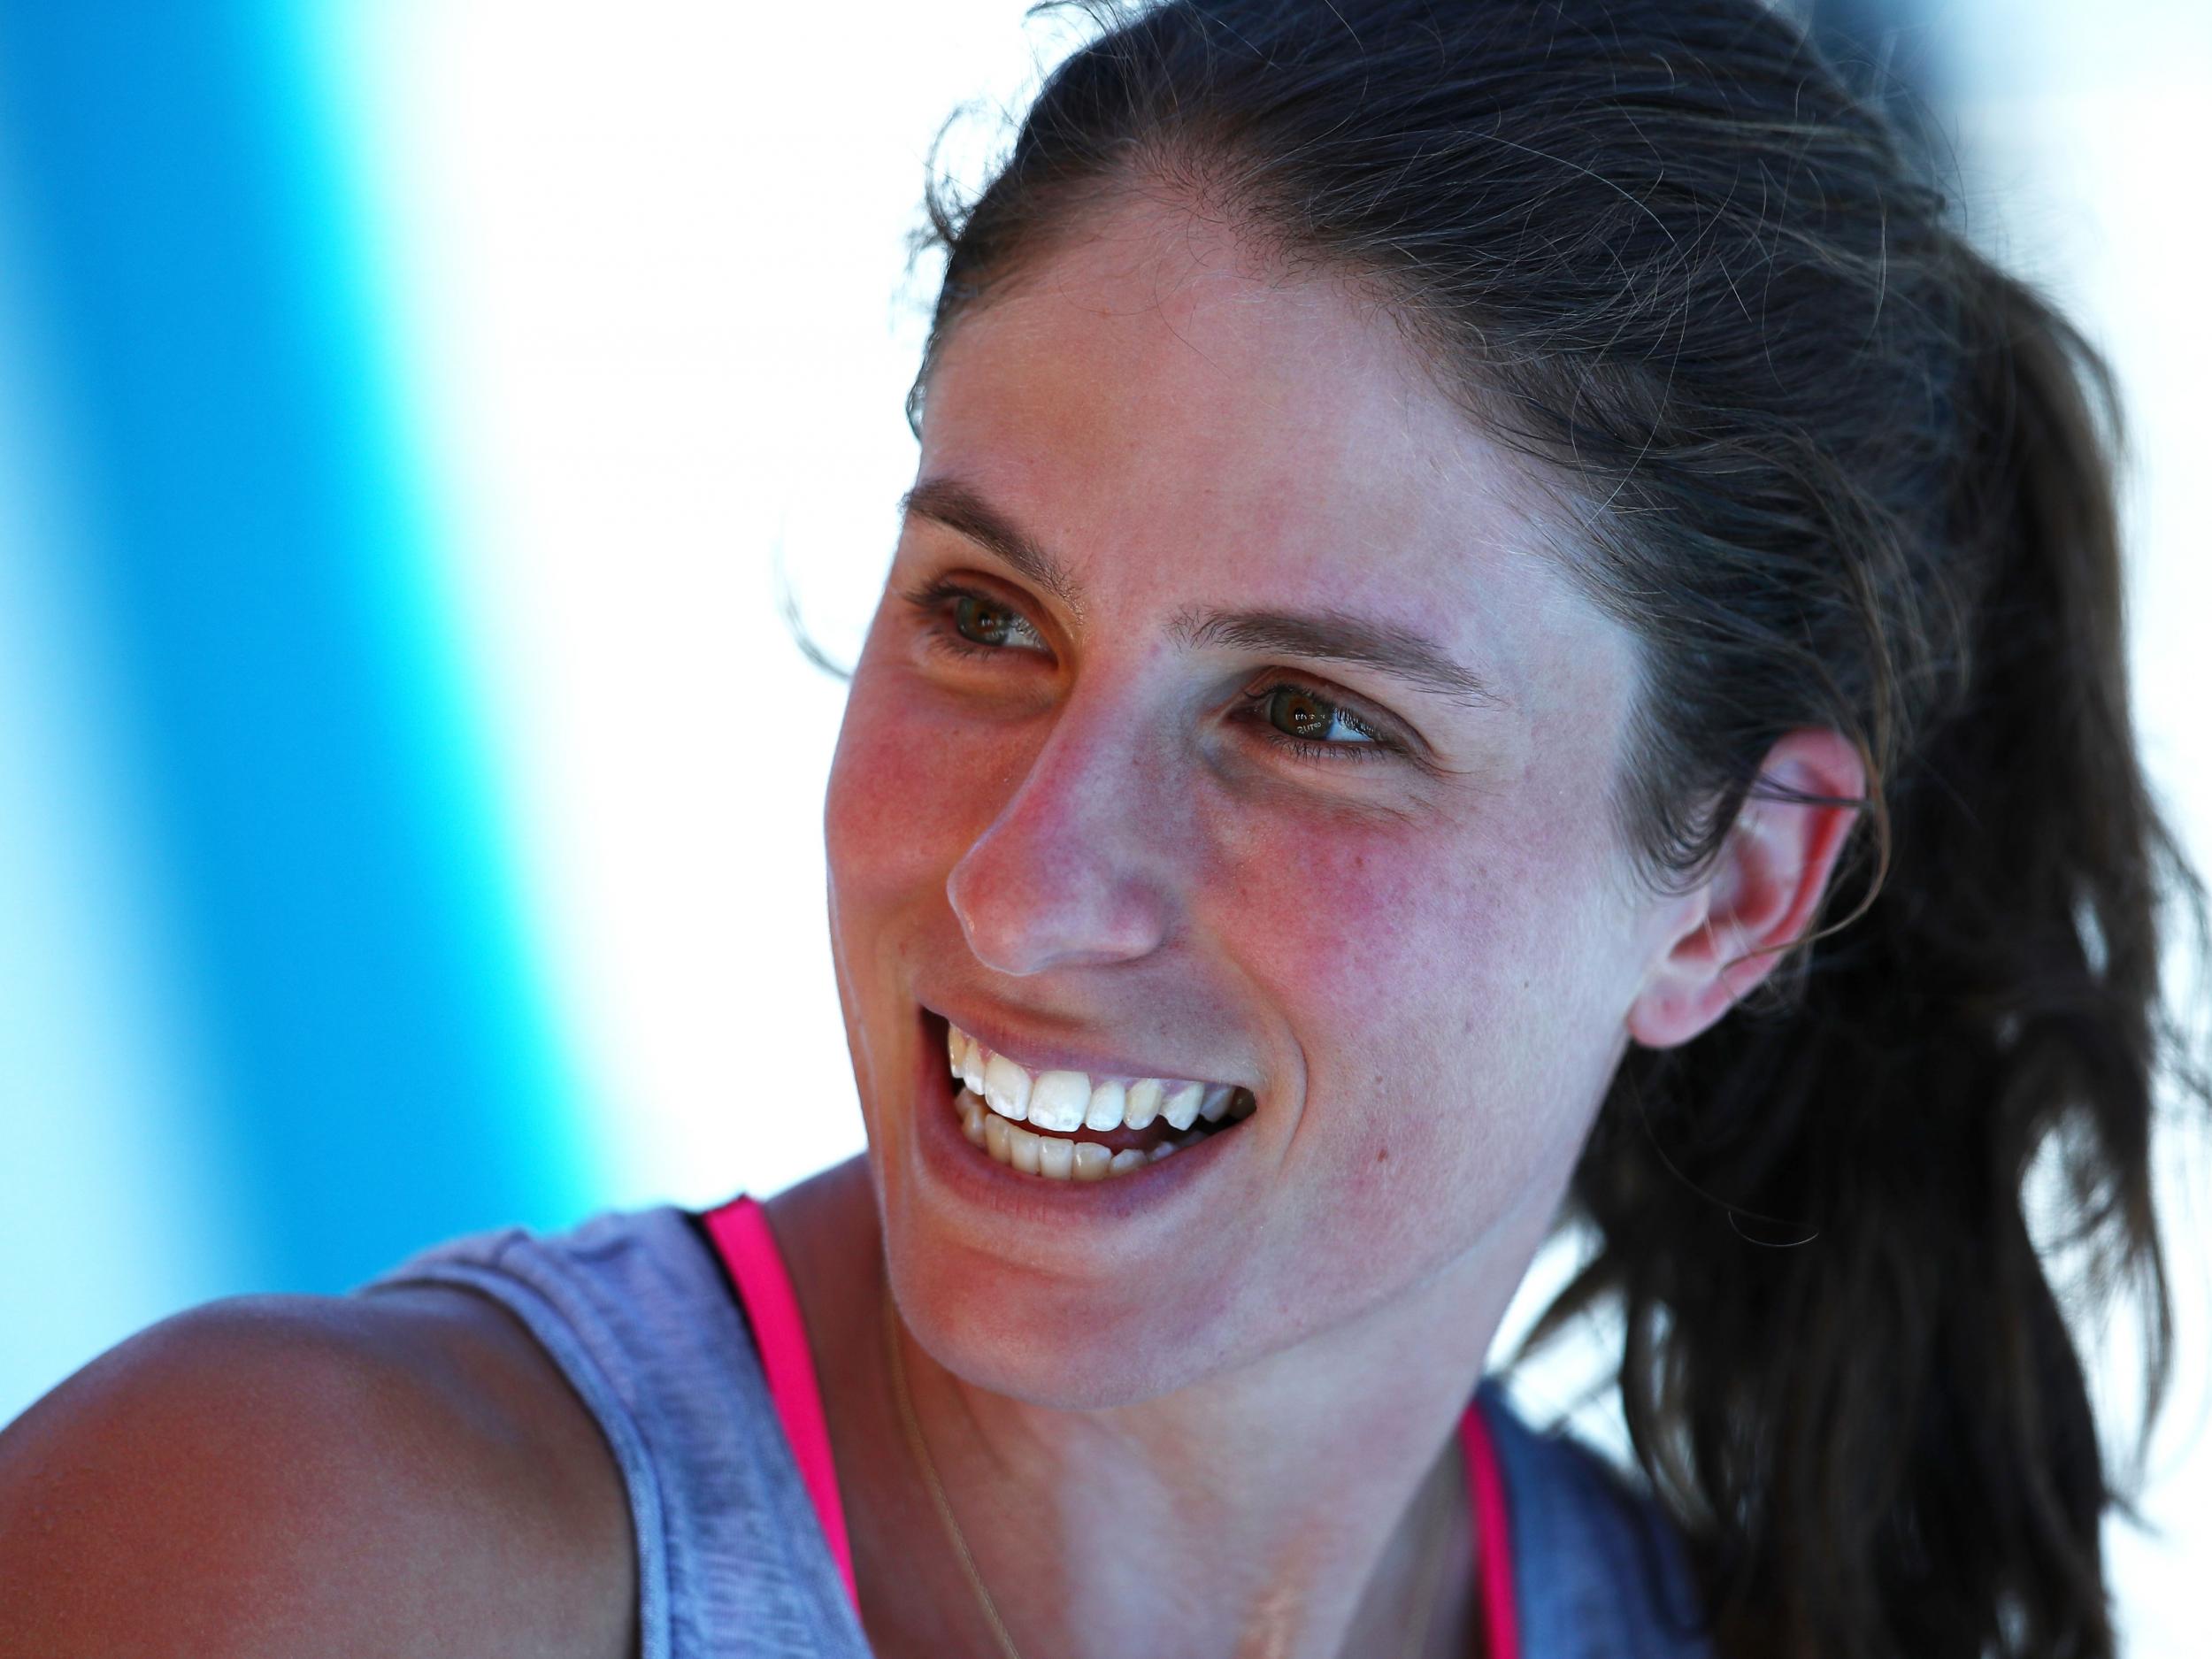 Konta's recent success has coincided with her improved mental strength